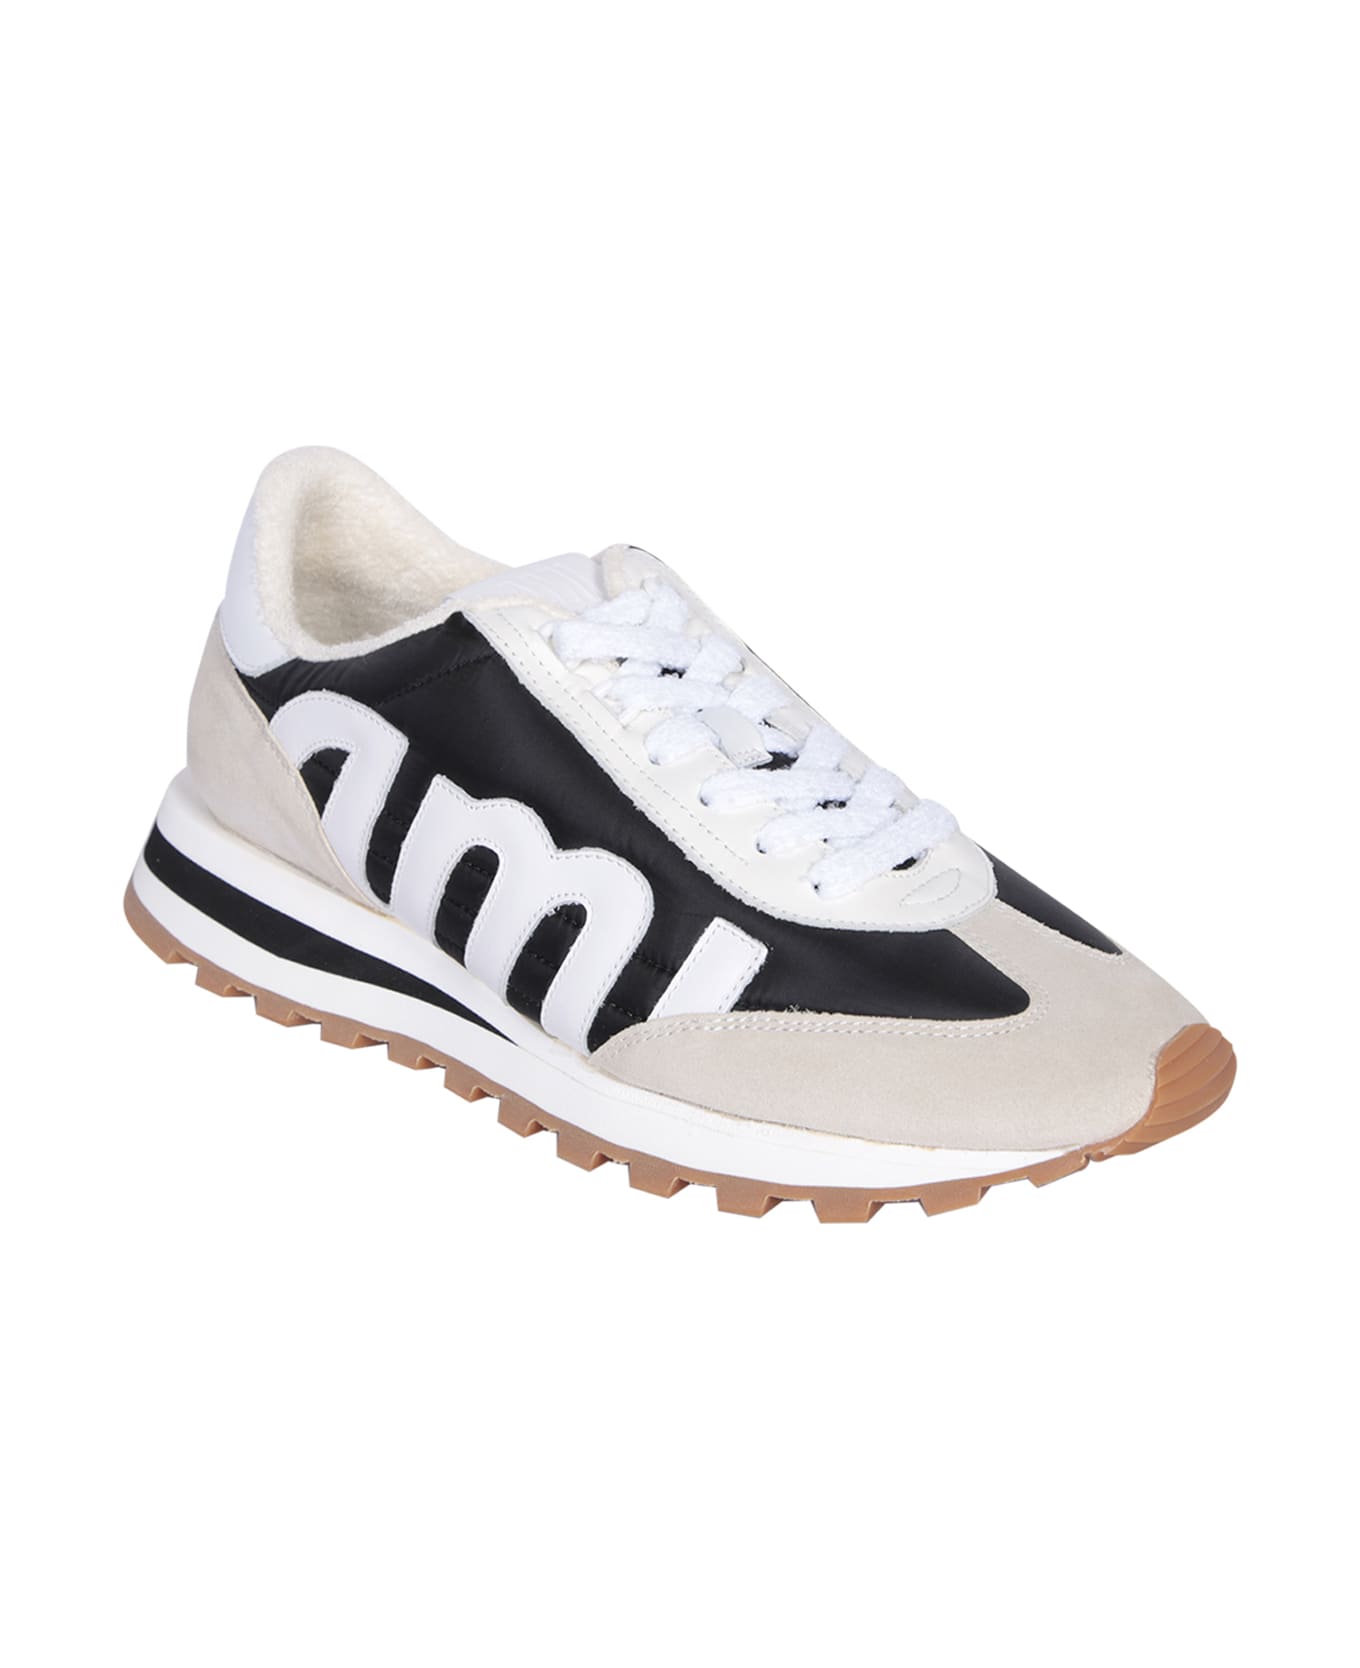 Ami Alexandre Mattiussi Ami Rush Leather And Canvas Sneakers In Black And Ivory - Black